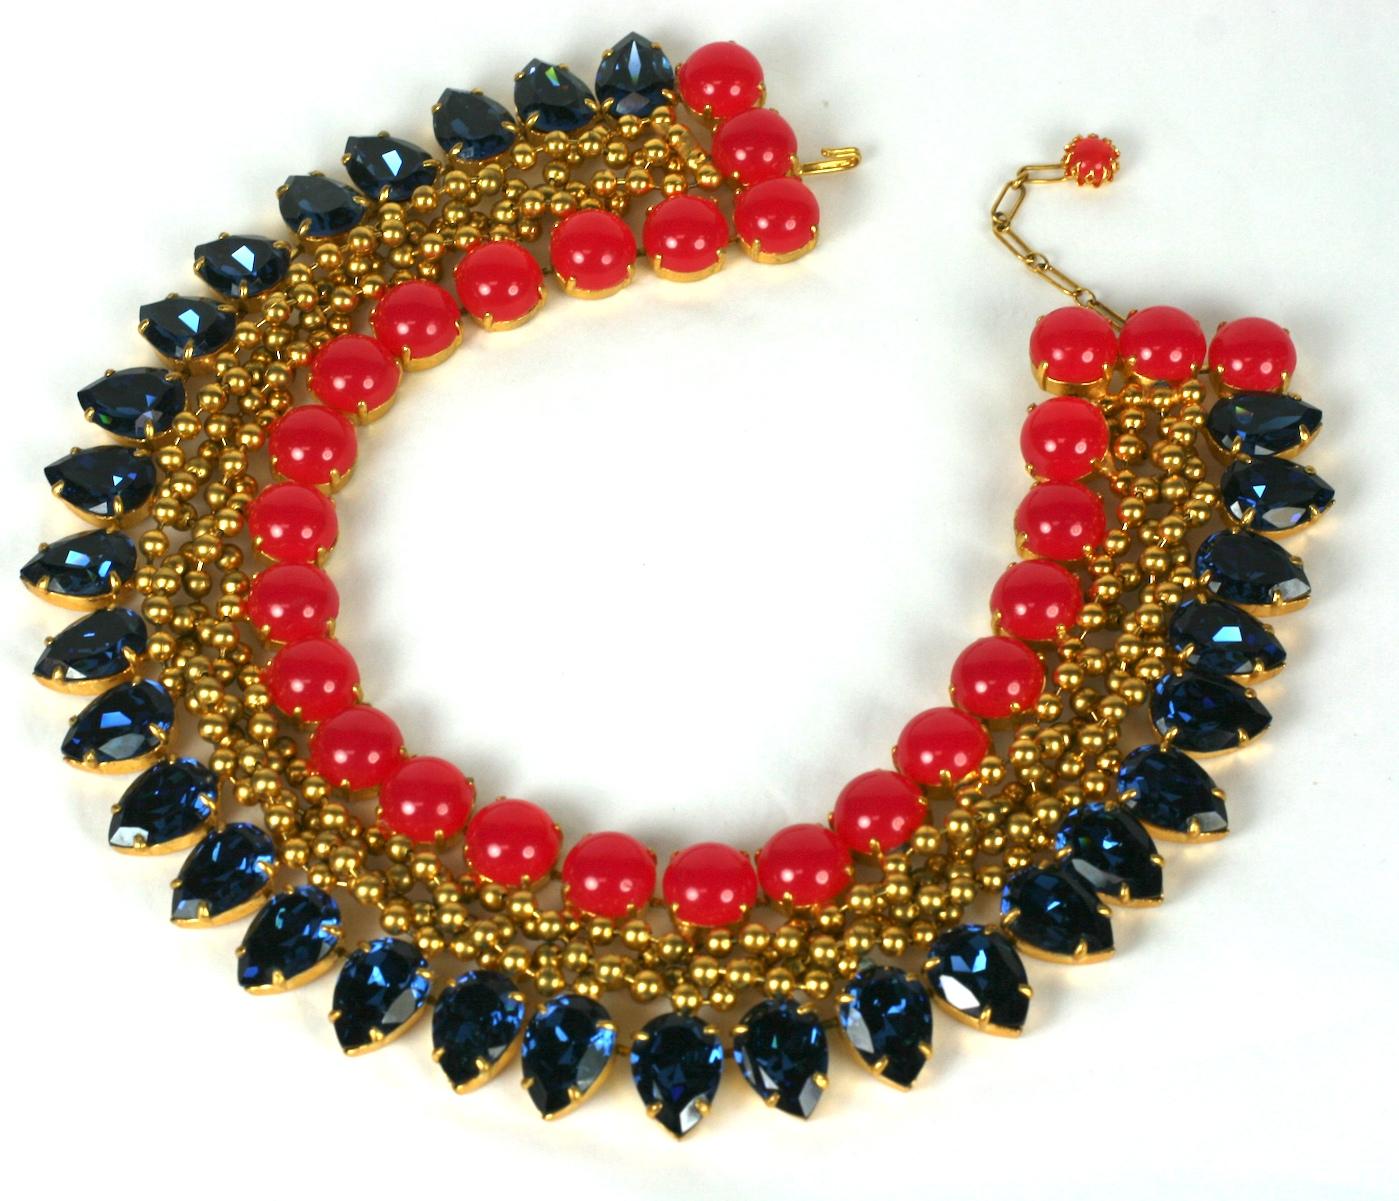 Massive Countess Cis Mughal bib necklace from France, 1950s. Composed of signature braided gilt ball chain,  deep sapphire faceted pear shape crystal stones and watermelon colored round cabochons. Many of her pieces are unsigned  This is a rare